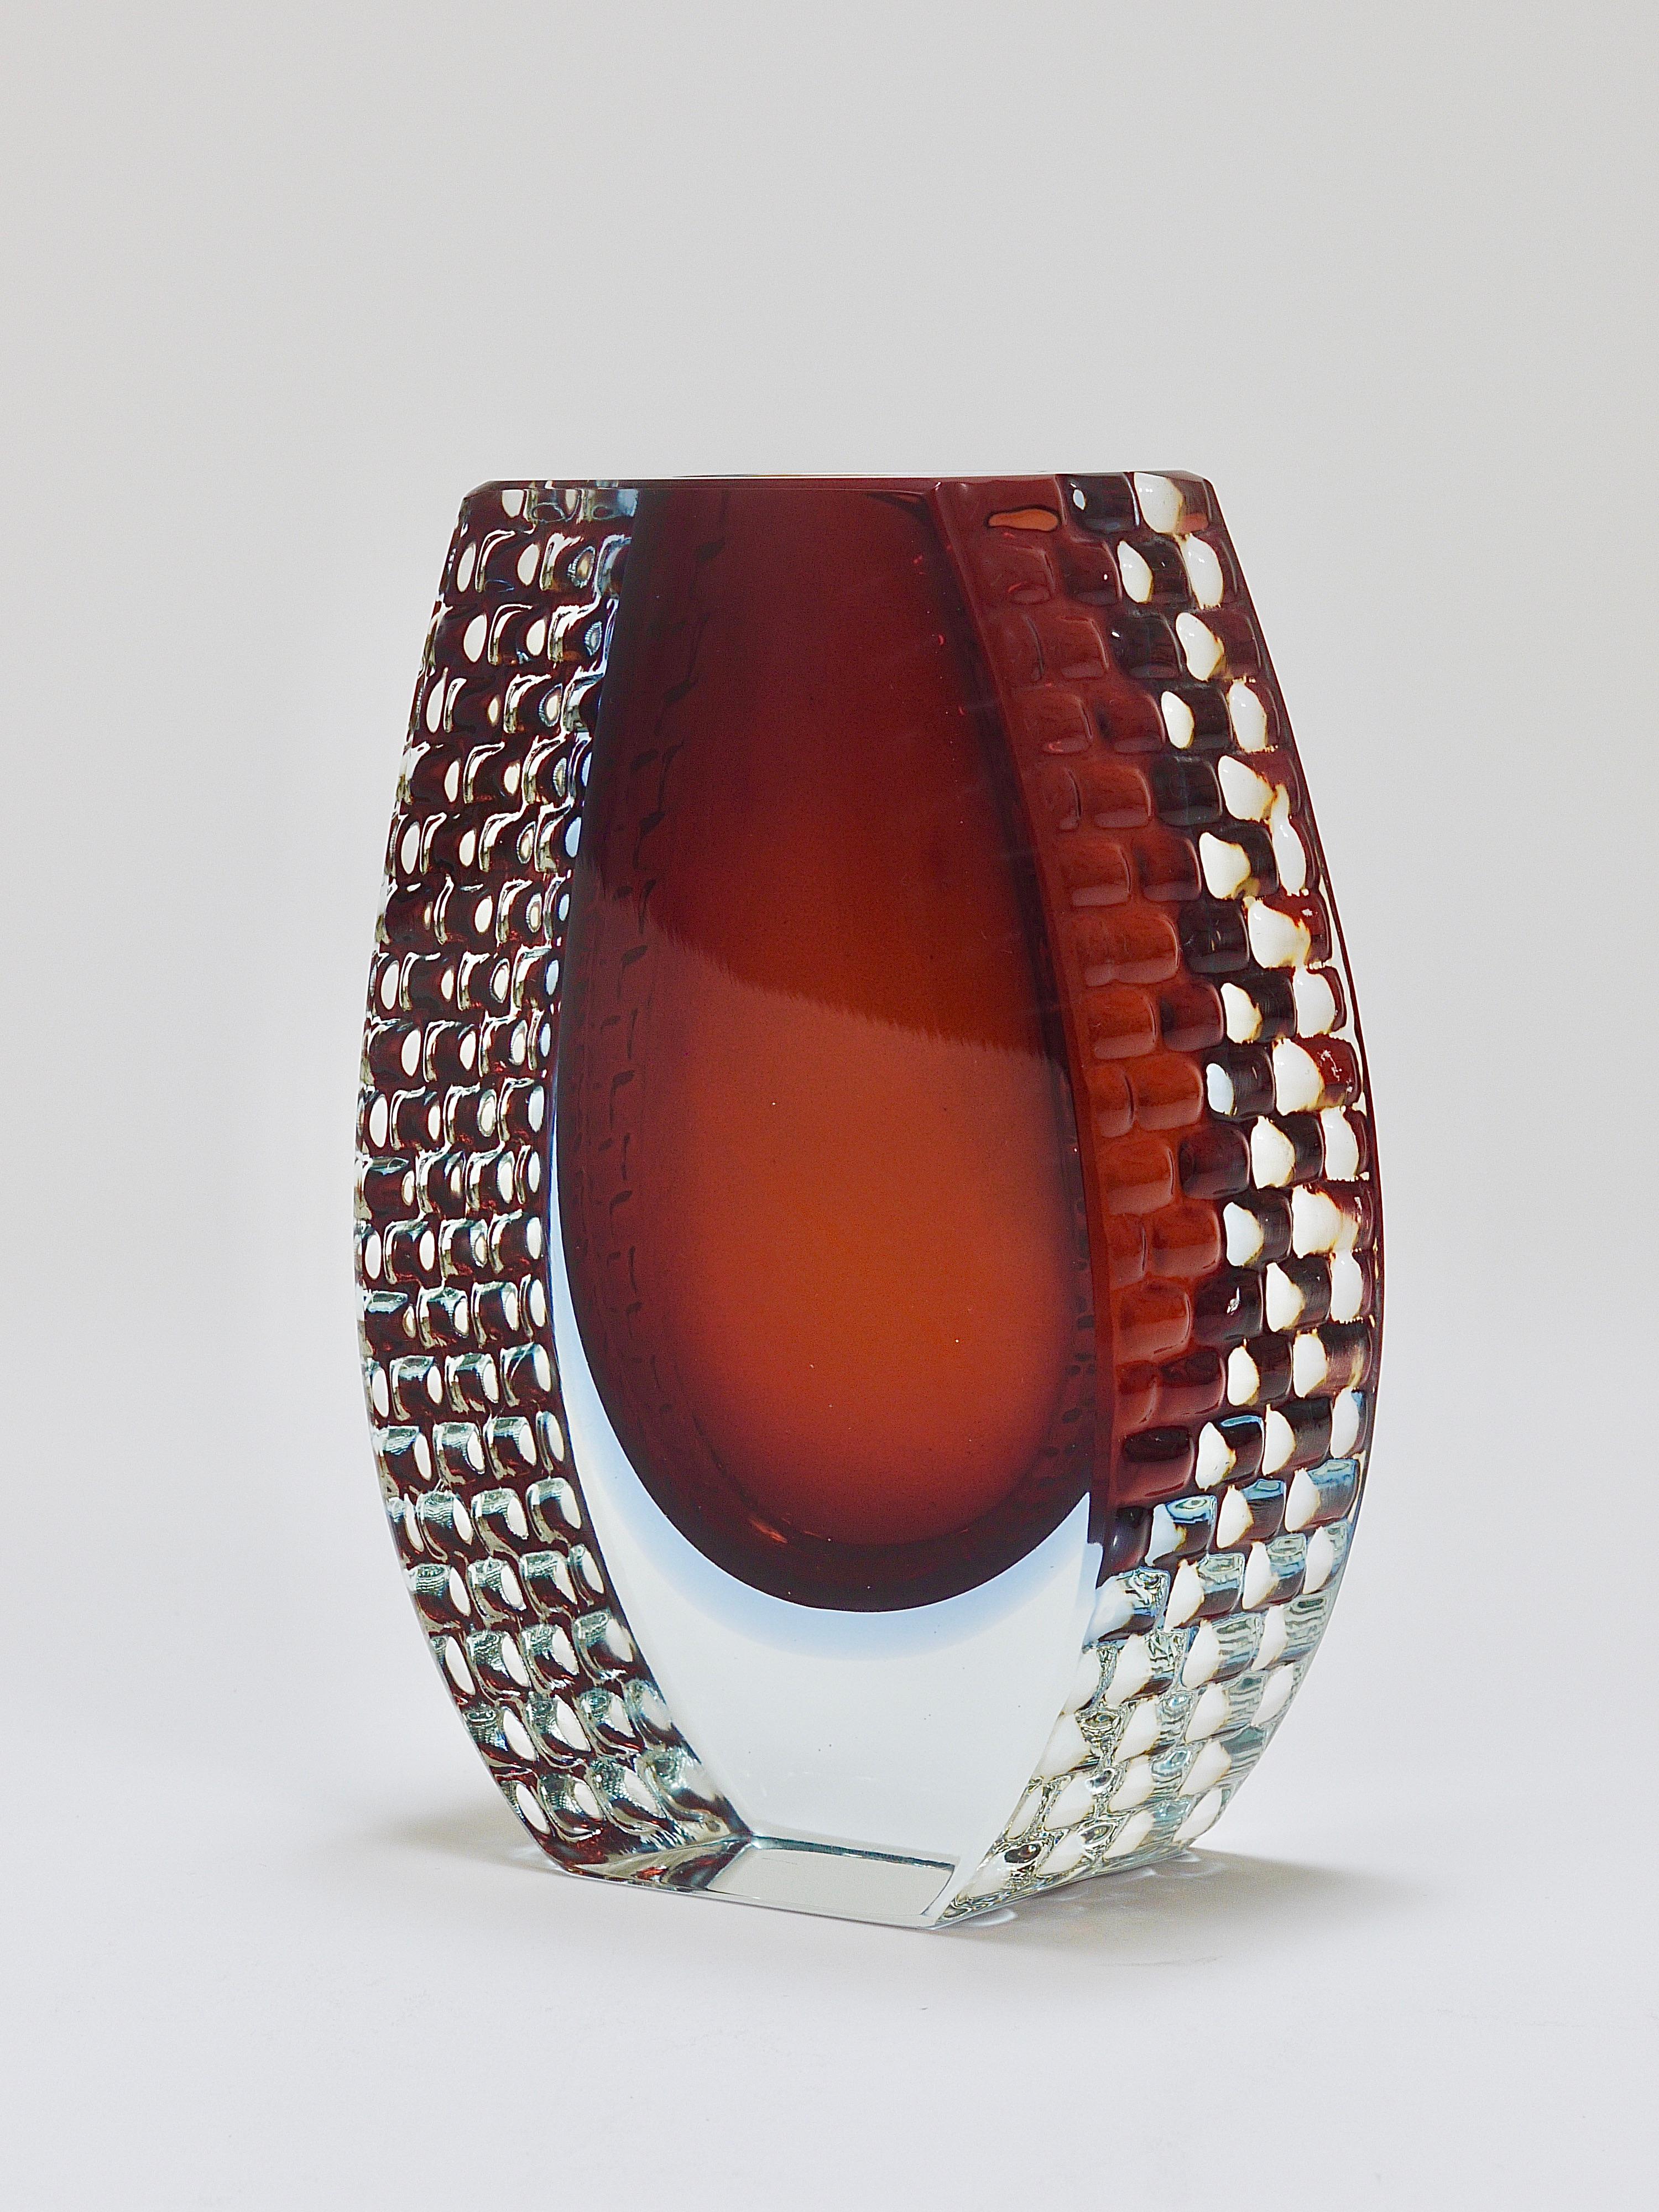 Faceted Large Mandruzzato Sommerso Murano Textured Facetted Art Glass Vase, Italy, 1970s For Sale